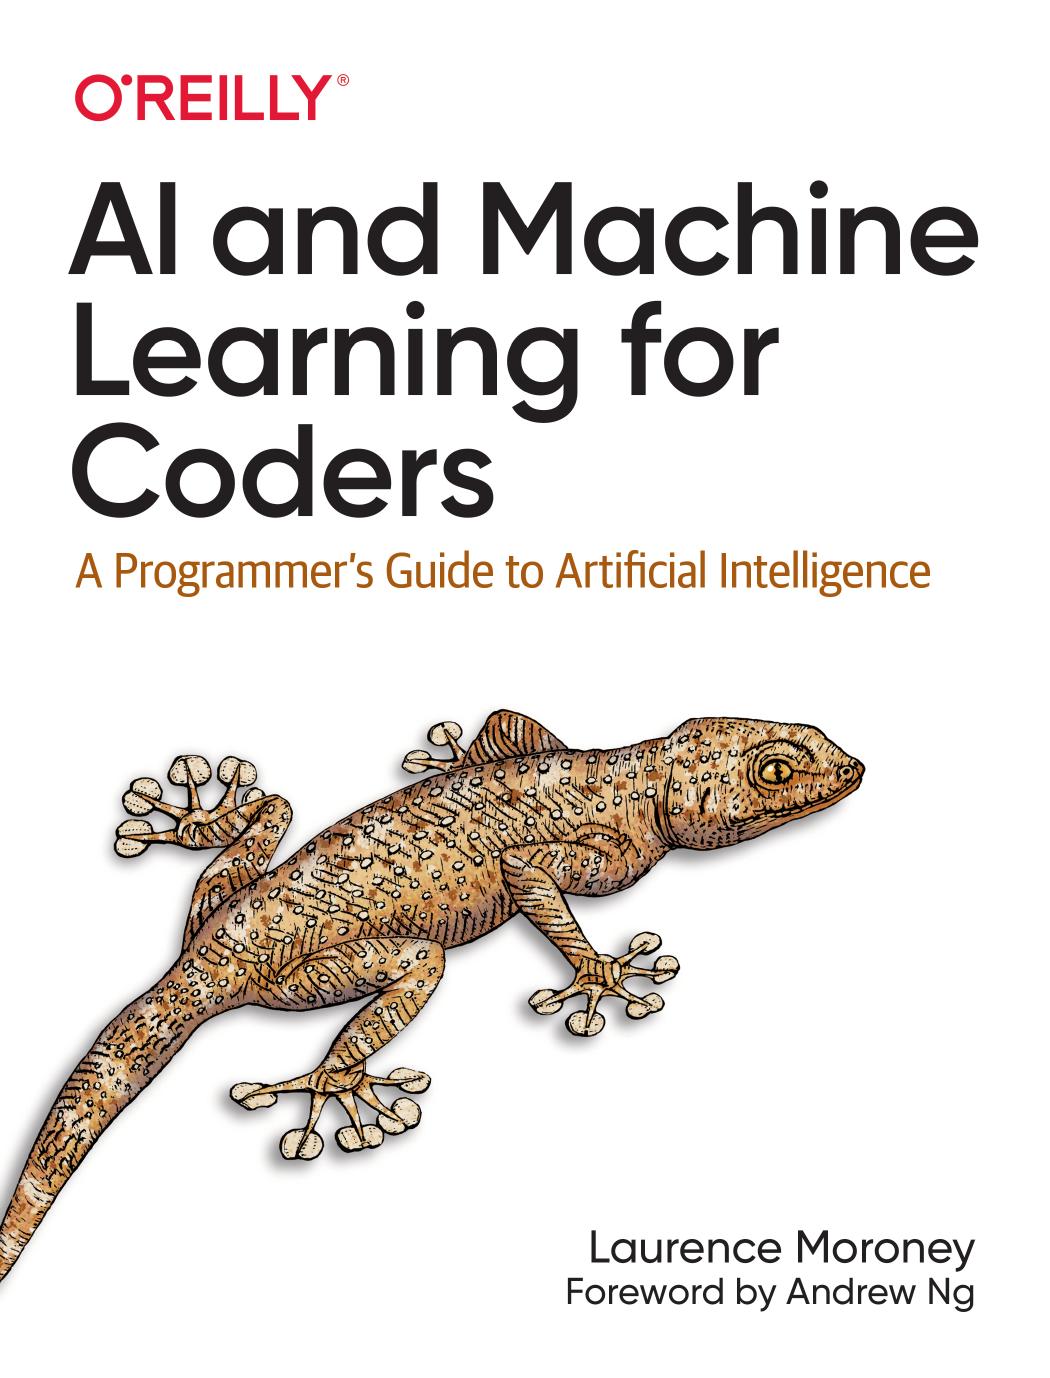 AI and Machine Learning for Coders by Laurence Moroney